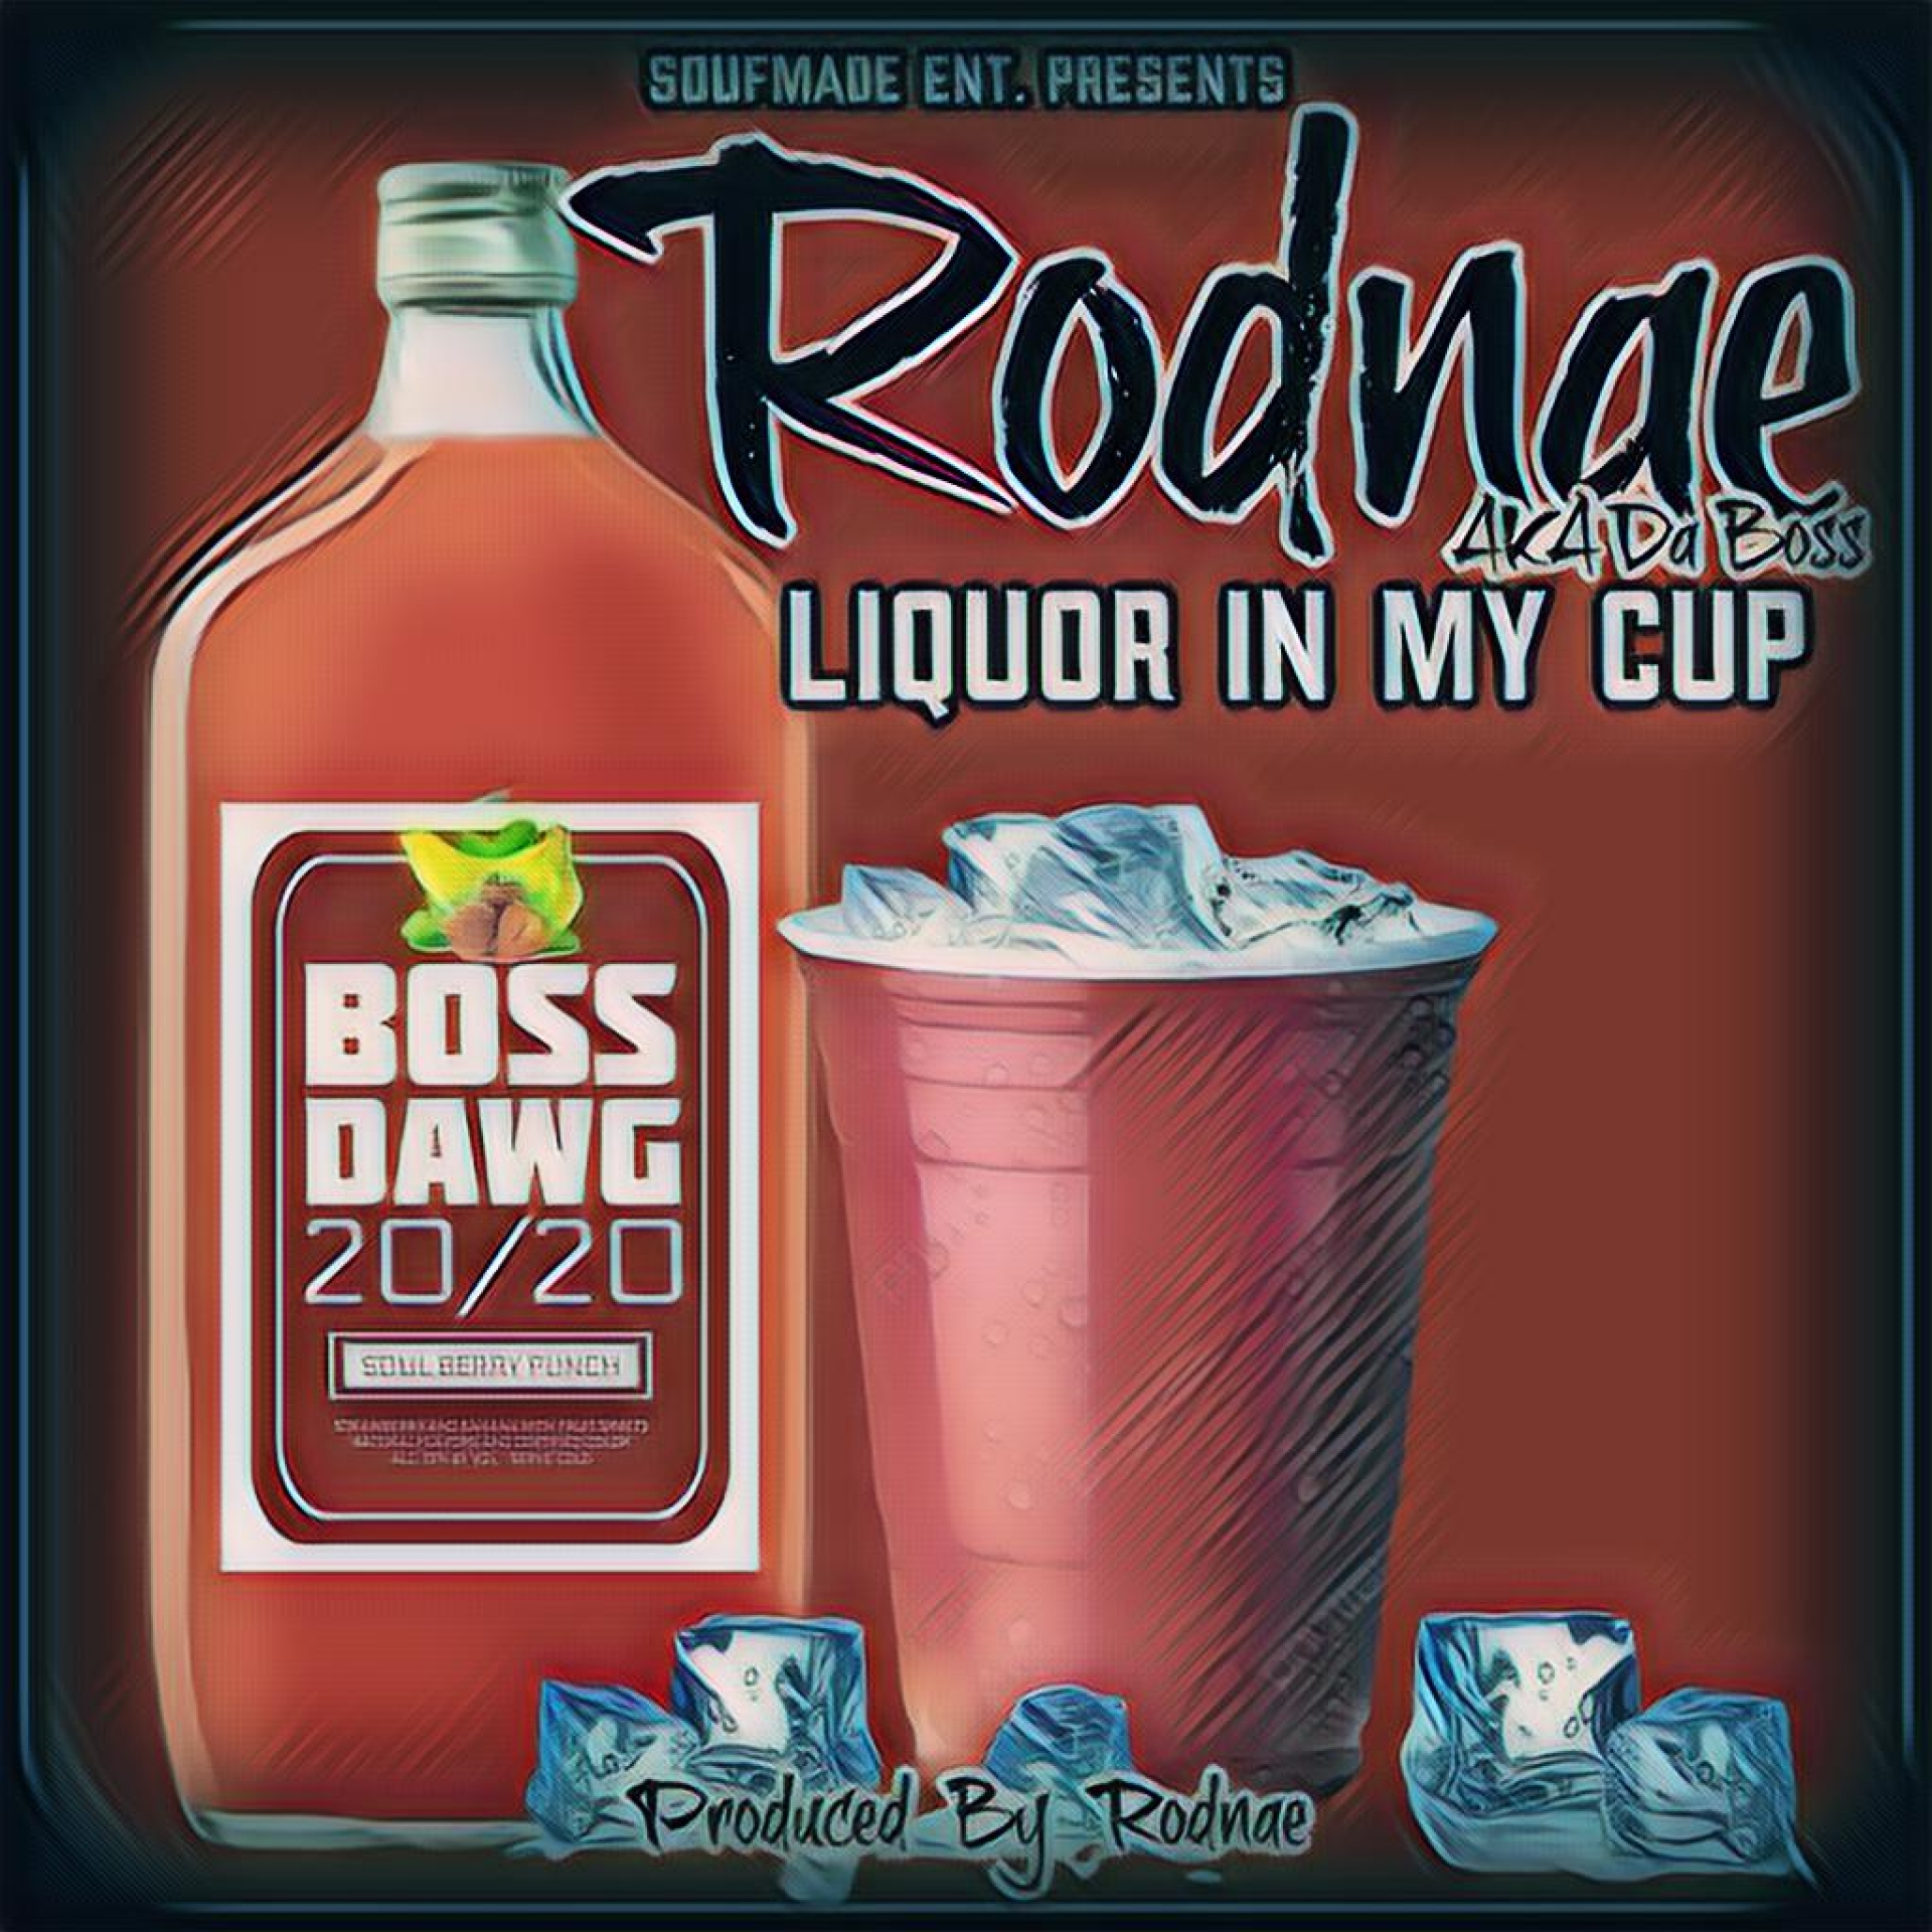 Art for Liquor In My Cup  by Rodnae @rodnaedaboss